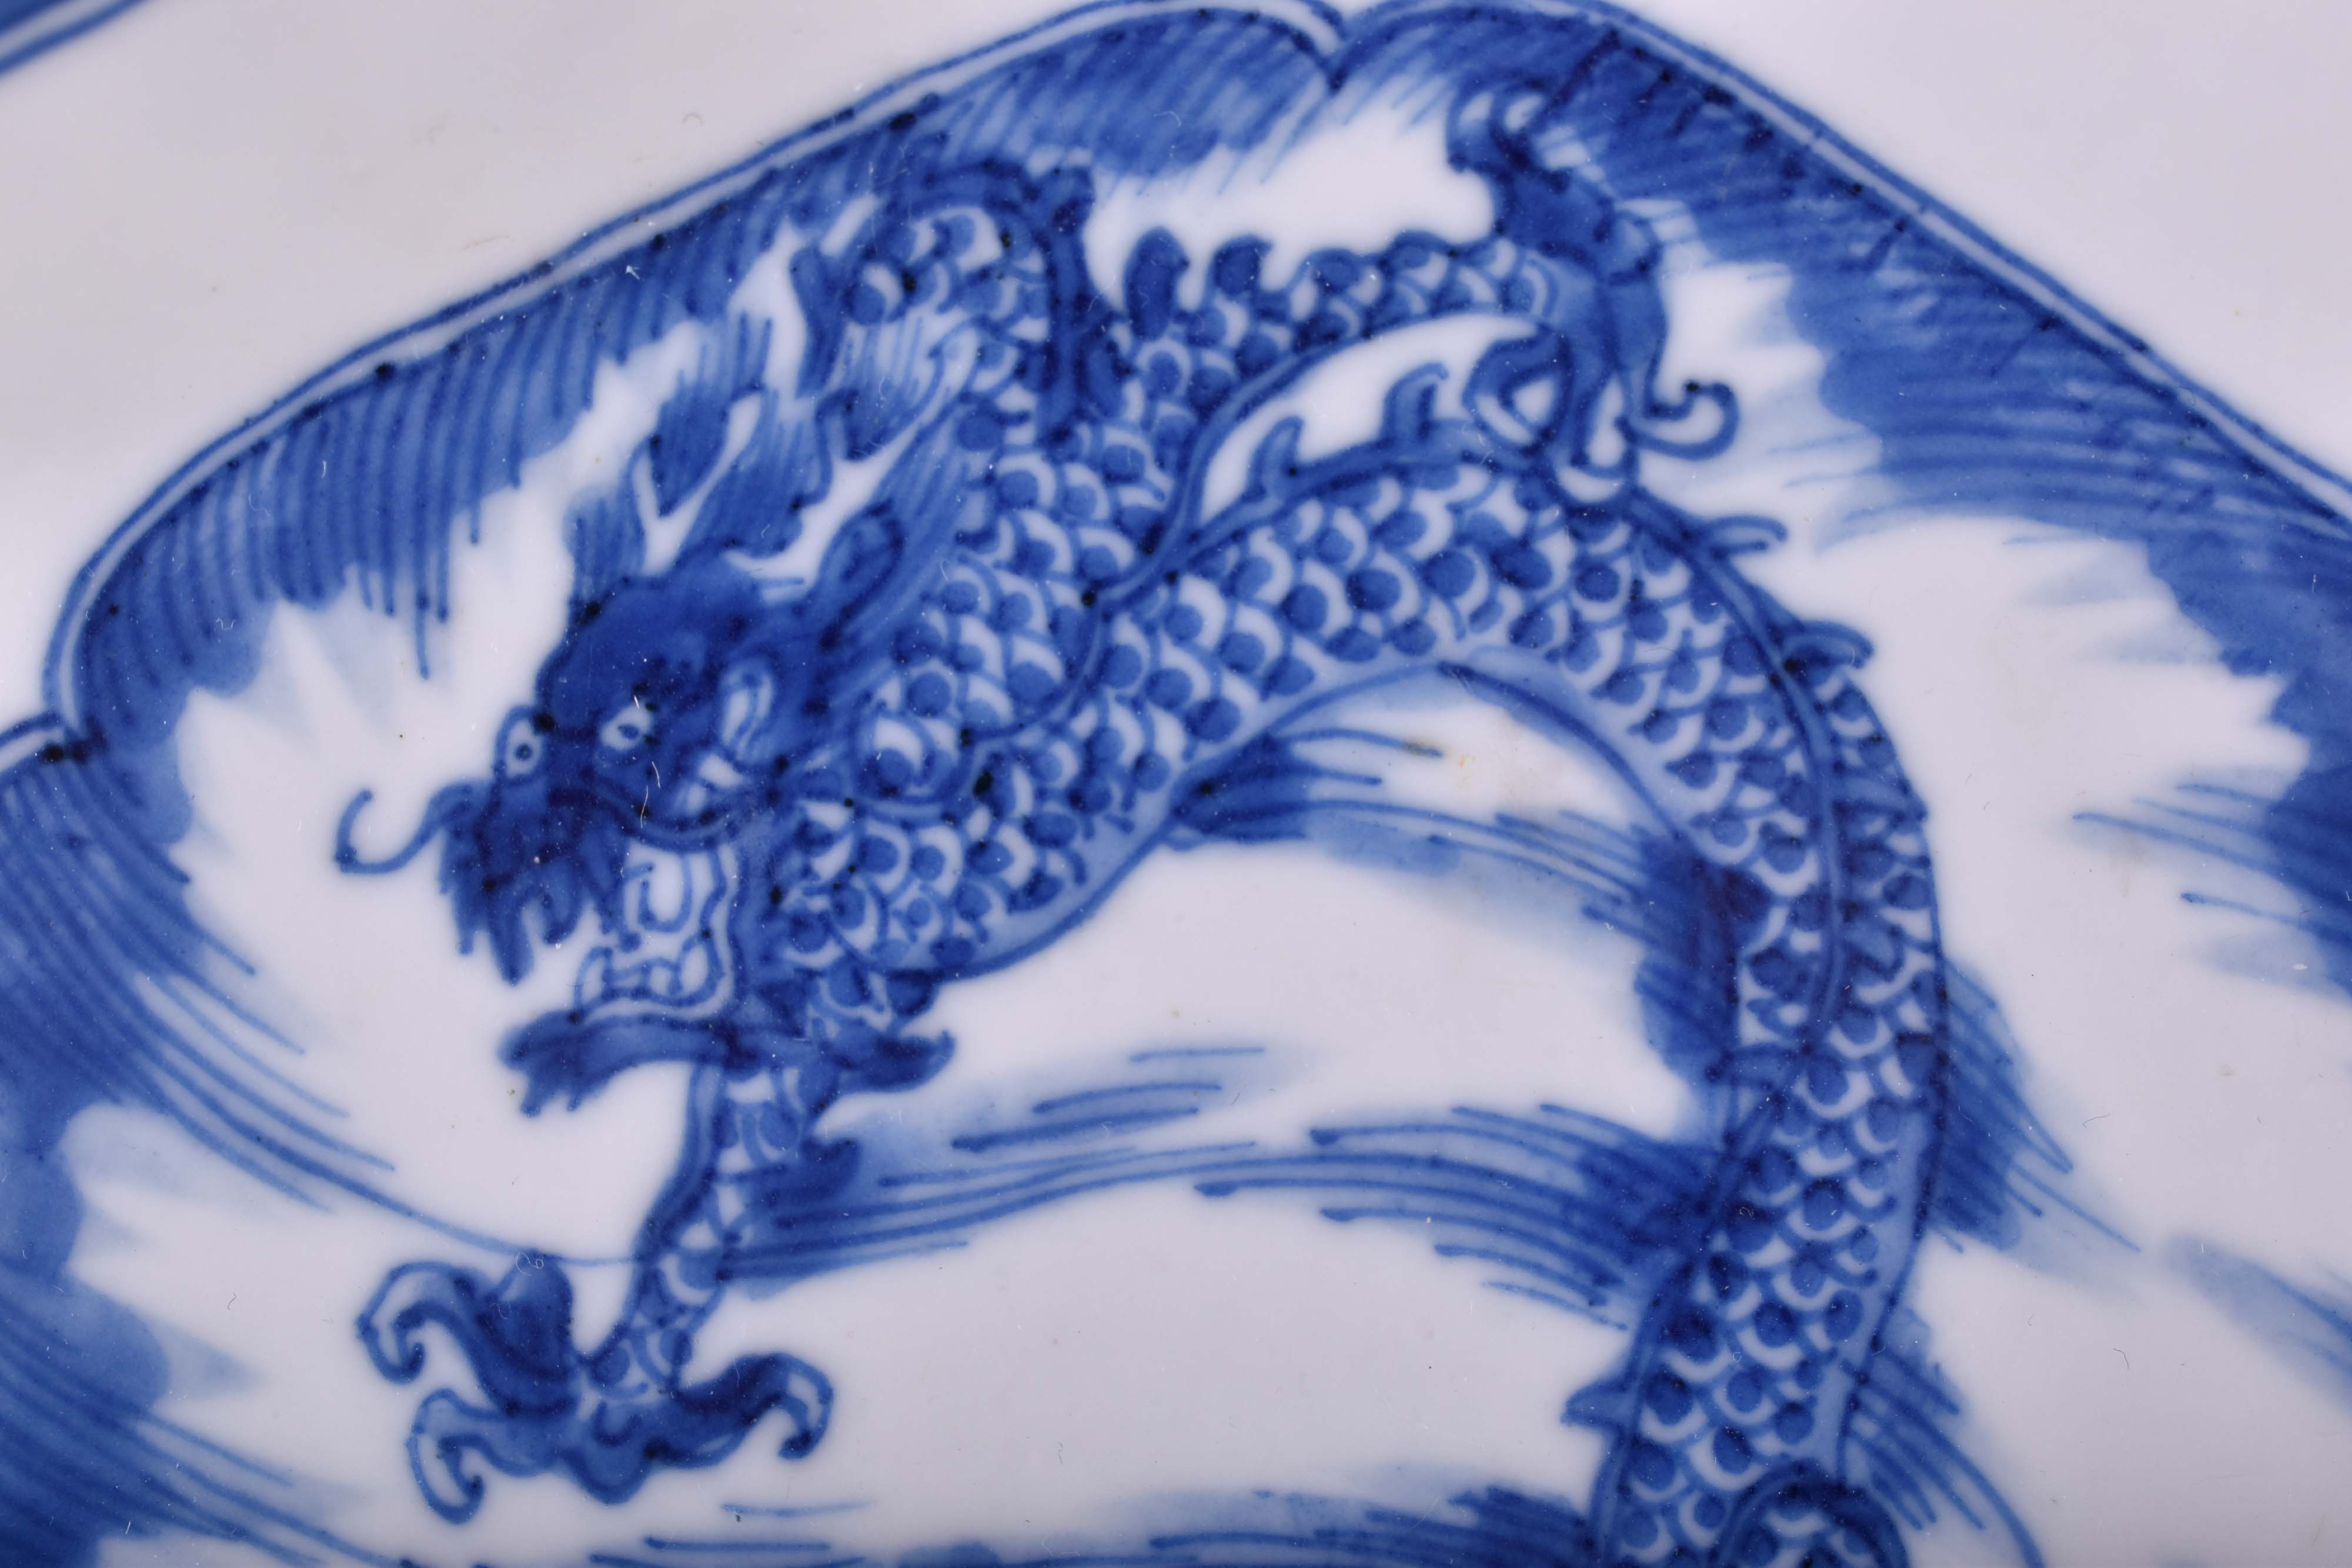  Bowl China Qing dynasty 17th / 18th century  - Image 5 of 8